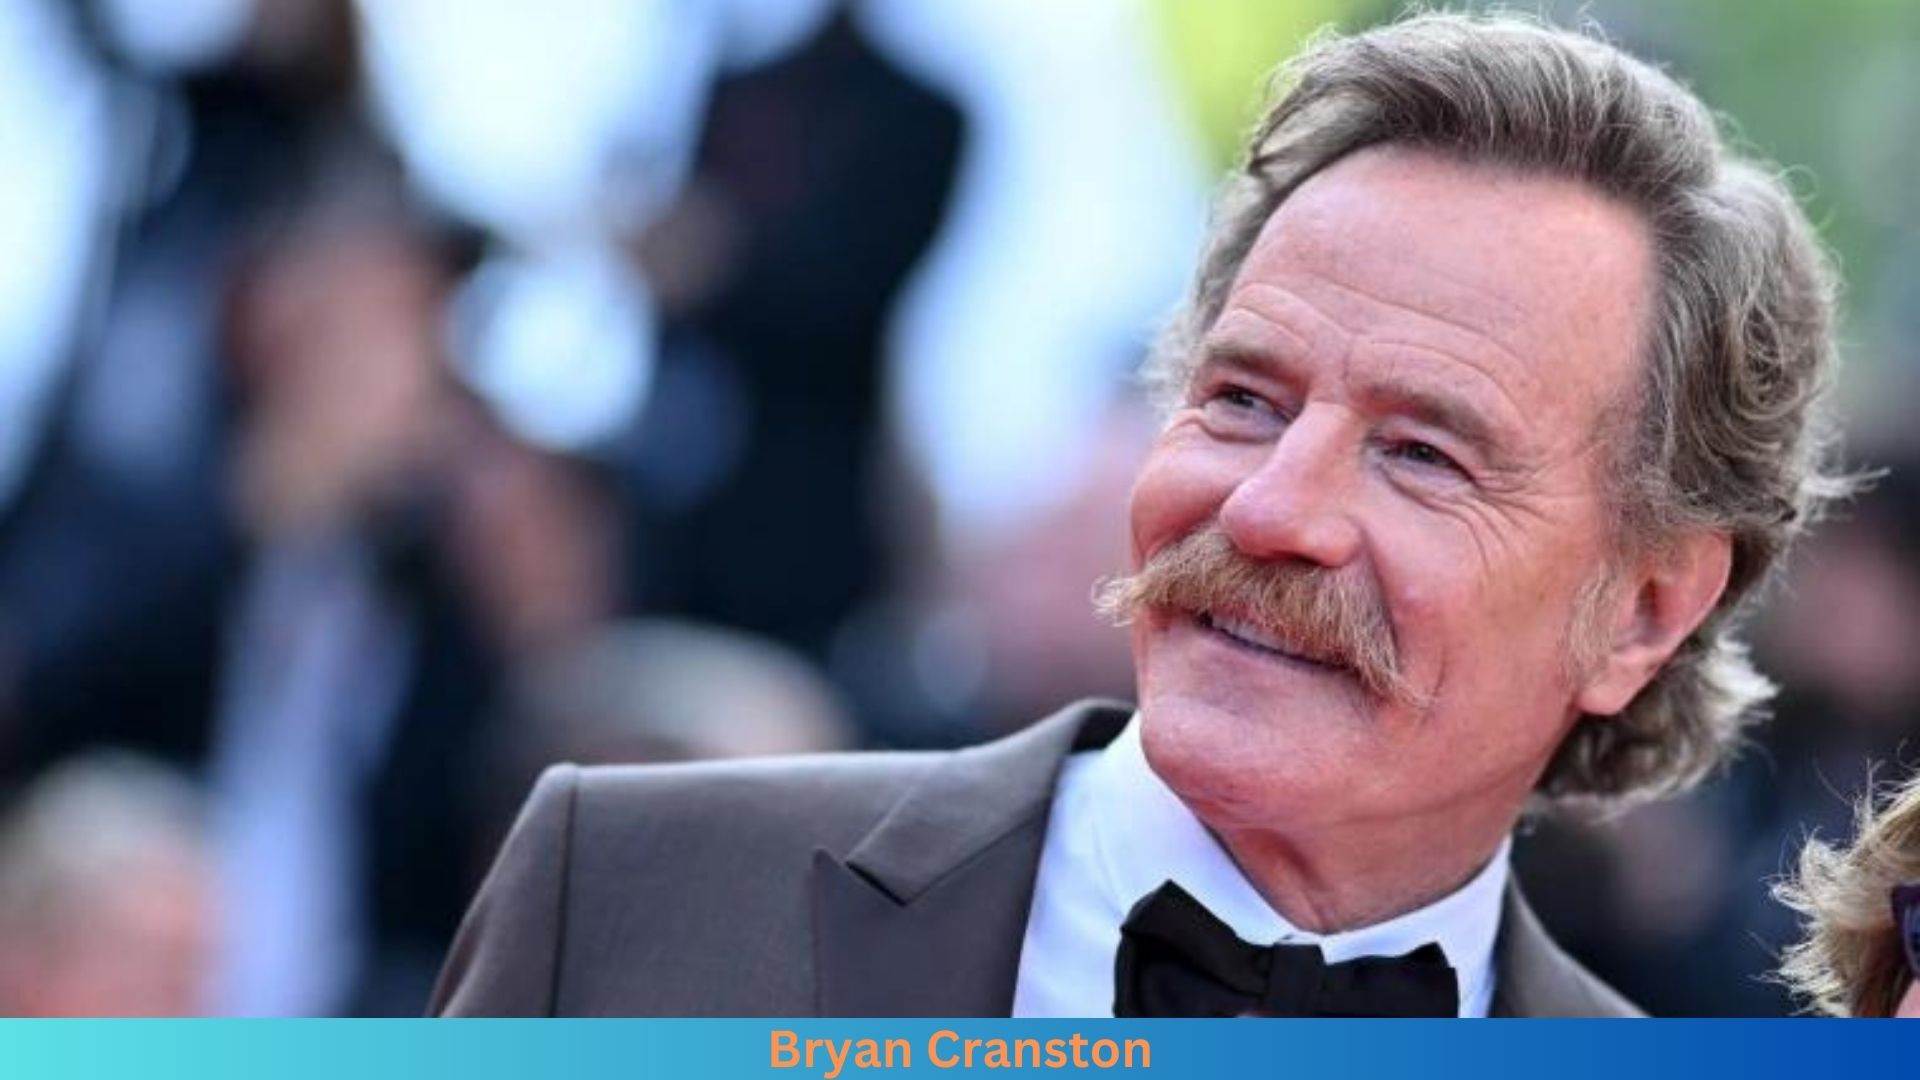 What is the Net Worth of Bryan Cranston?